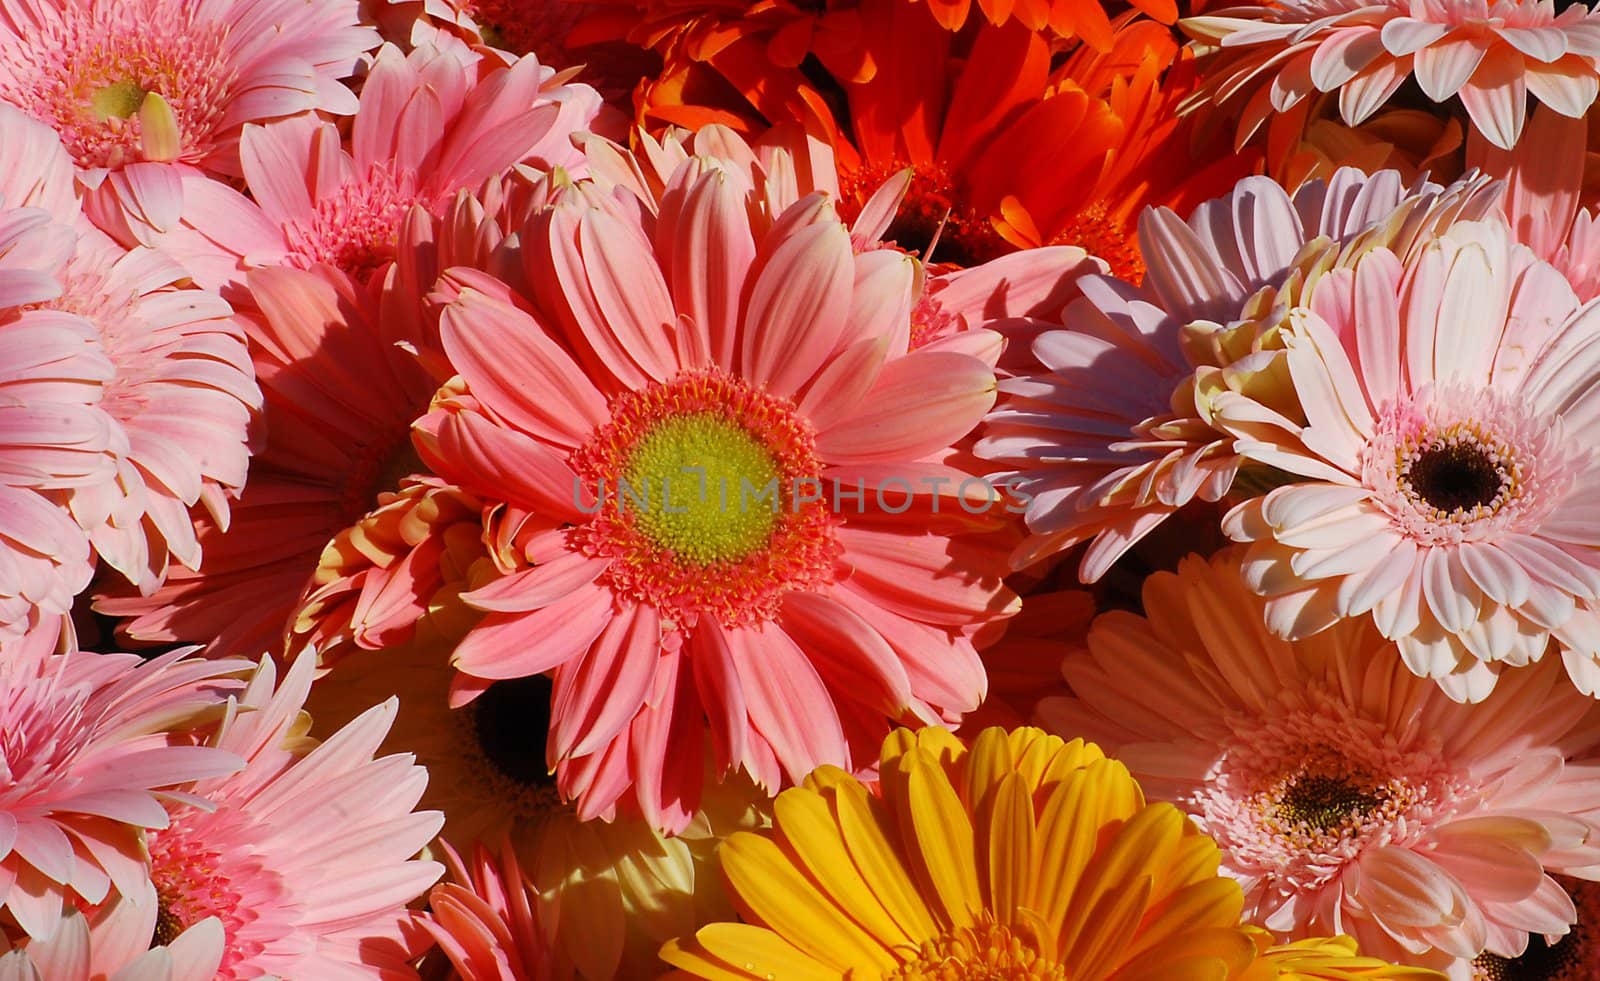 Pink, red, yellow gerbera close together as background